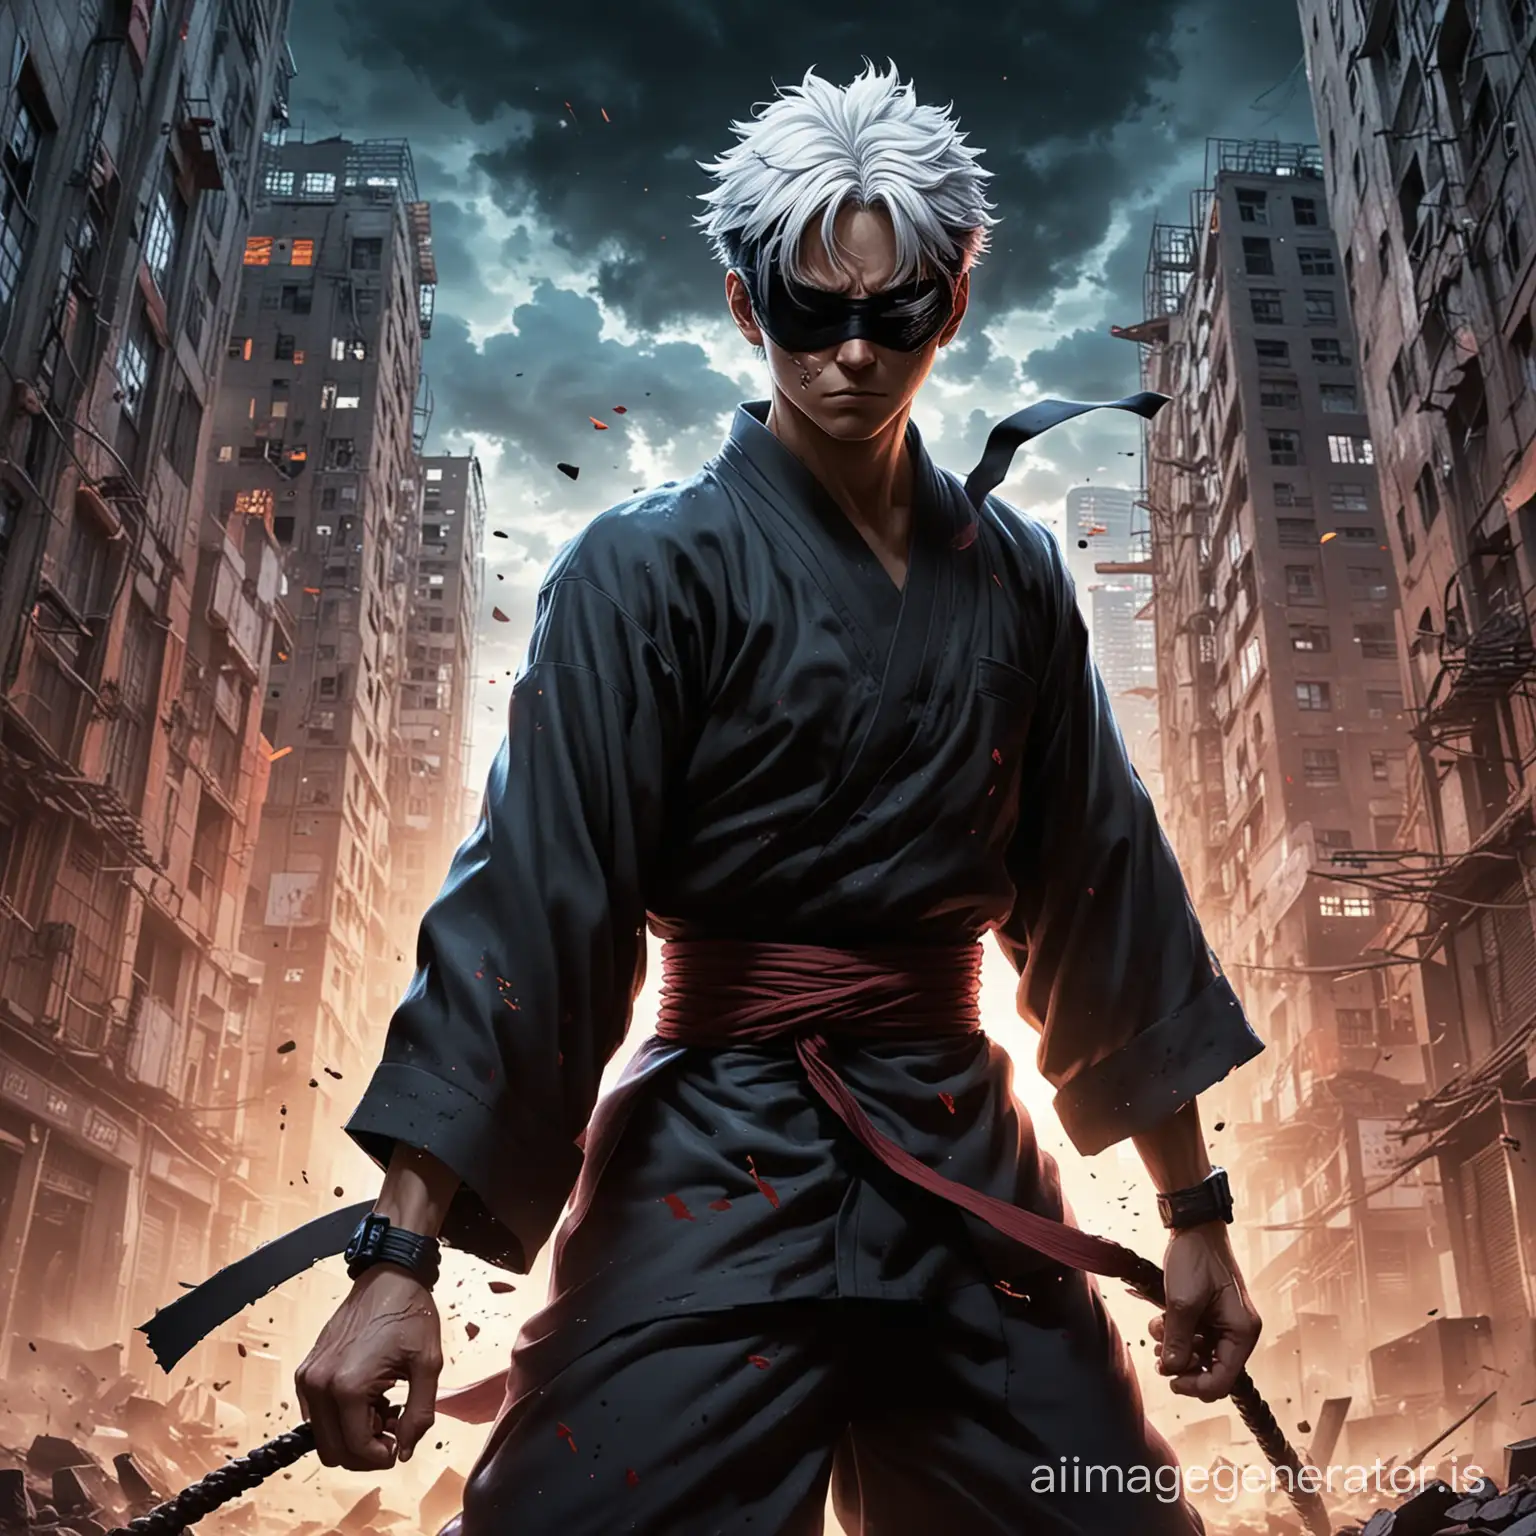 Jujutsu Kaisen's Satoru Gojo, full body, black blindfold, white haired, poised in the heart of a shattered cityscape, channels the immense power of his one-handed Jujutsu art. Surrounded by crumbling buildings and the echoes of battles past, his hair flutters in the tumultuous energy currents his power summons. The mood is electric, charged with the intensity of his focus and the gravity of his solitary stand against unseen foes. His eyes, even one concealed beneath the blindfold, glow with the force of his conviction, casting light in the darkness. This moment, where power and serenity intersect, is captured in a vibrant anime illustration style, bringing to life the dynamic essence of Gojo and his unwavering will. The artwork is executed with bold, sweeping strokes and a vivid color palette, designed to evoke the unique energy of the scene. --ar 16:9 --v 5